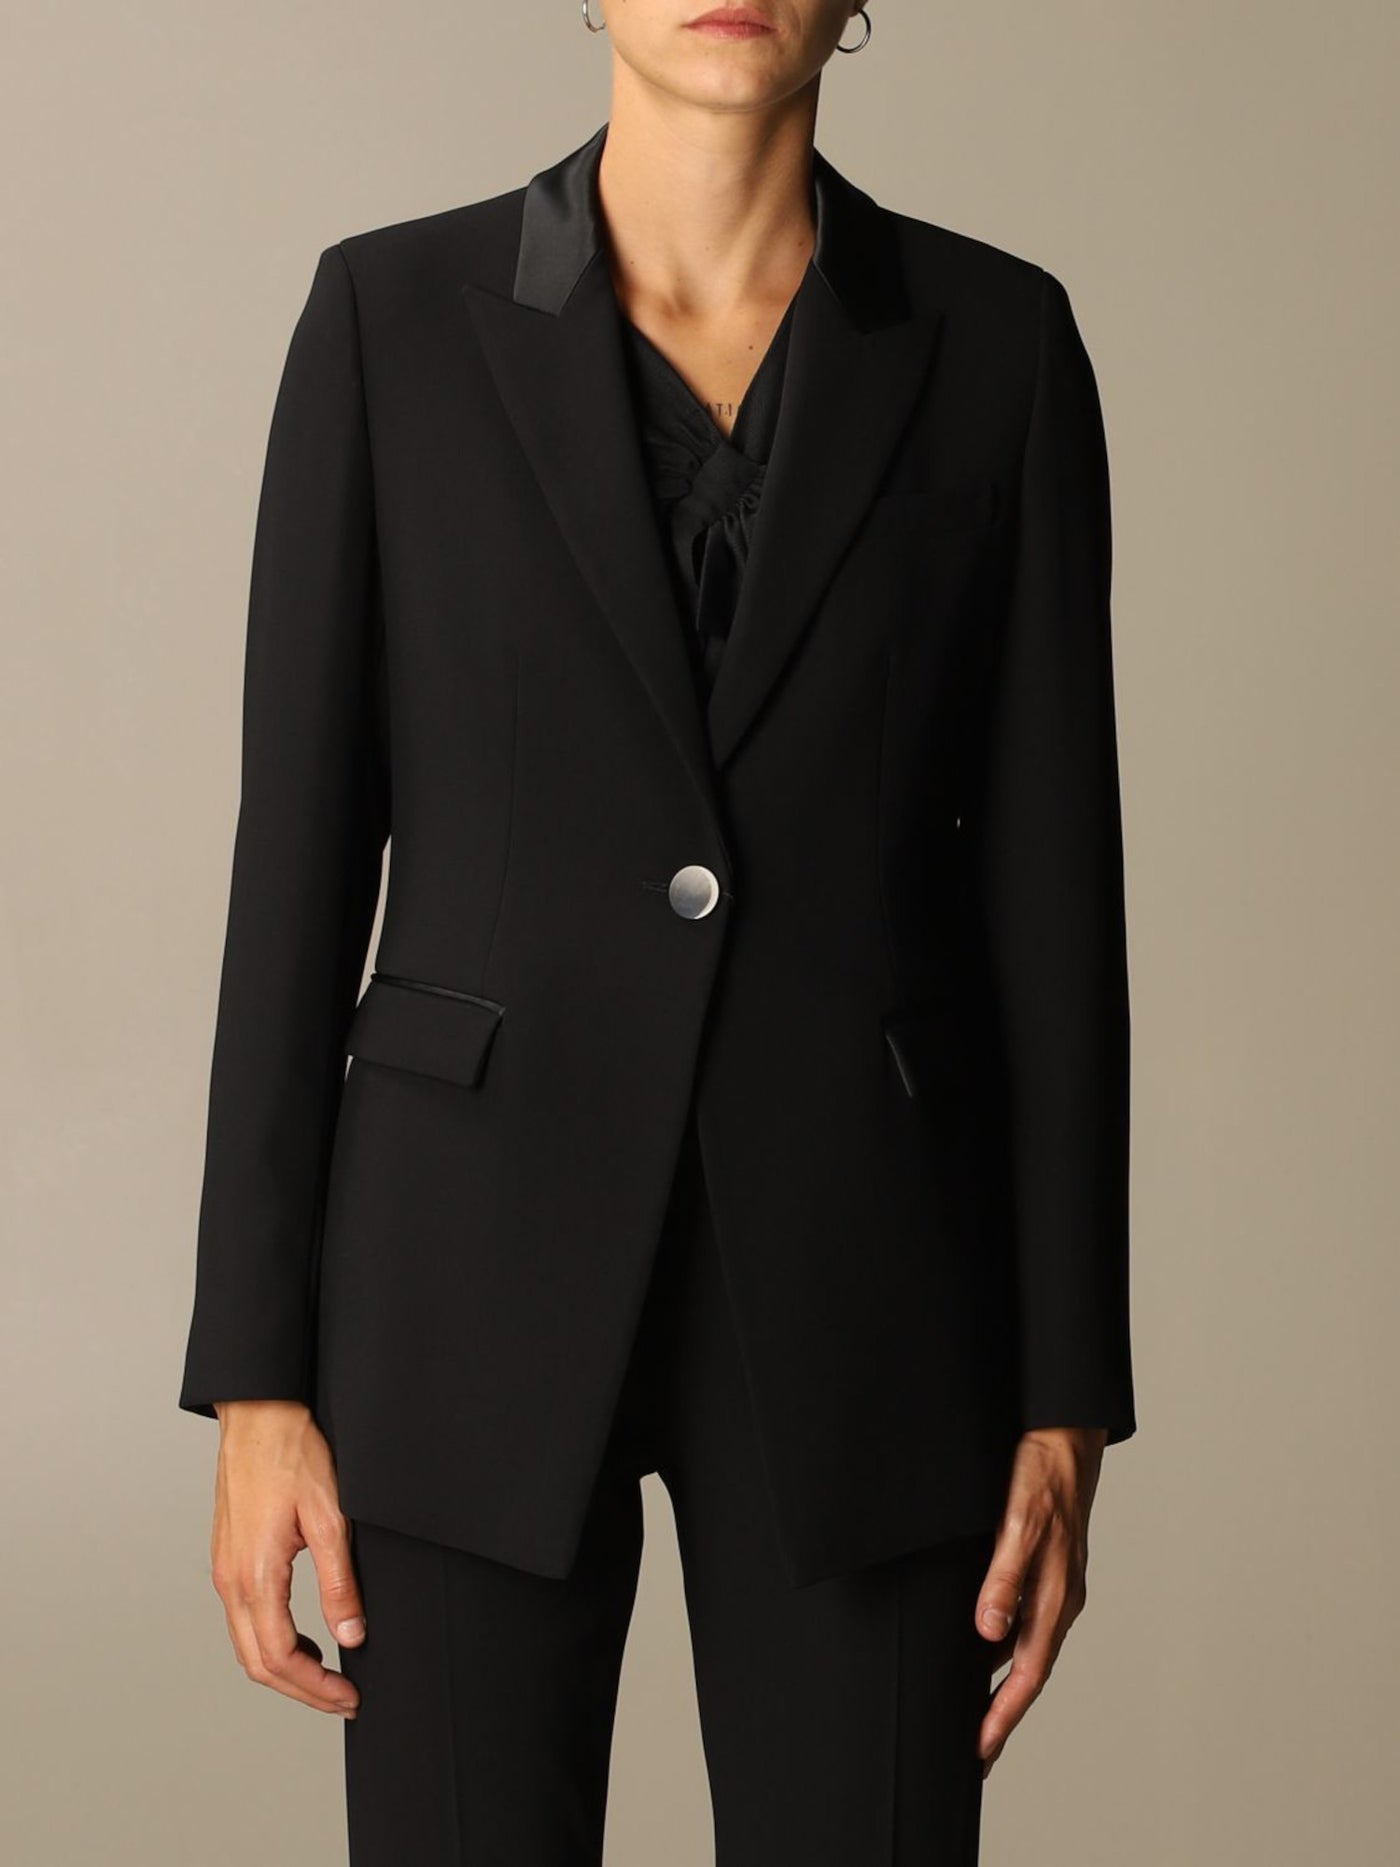 ARMANI Womens Black Pocketed Single Button Back Vent Lined Wear To Work Blazer Jacket 46